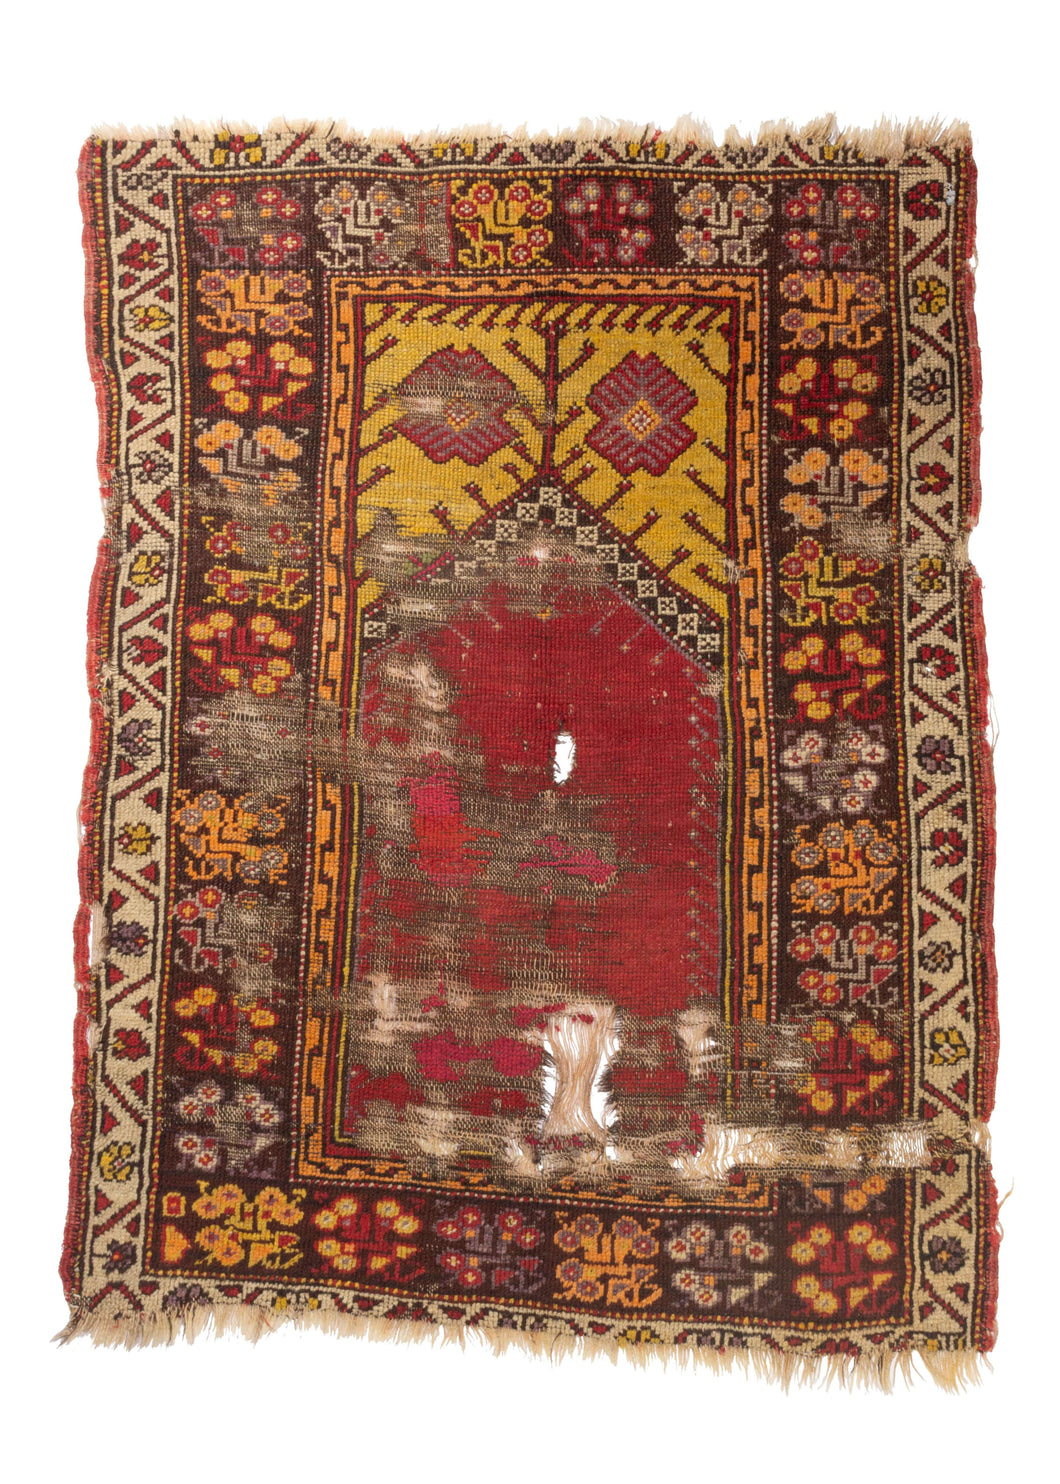 Rugs for Gift, 2.3x3.3 Ft Small Rug, Turkey Nursery Rug, Antique Rugs,  Turkish Rug, Vintage Rug, Red Antique Rugs, Outdoor Entry Rug 